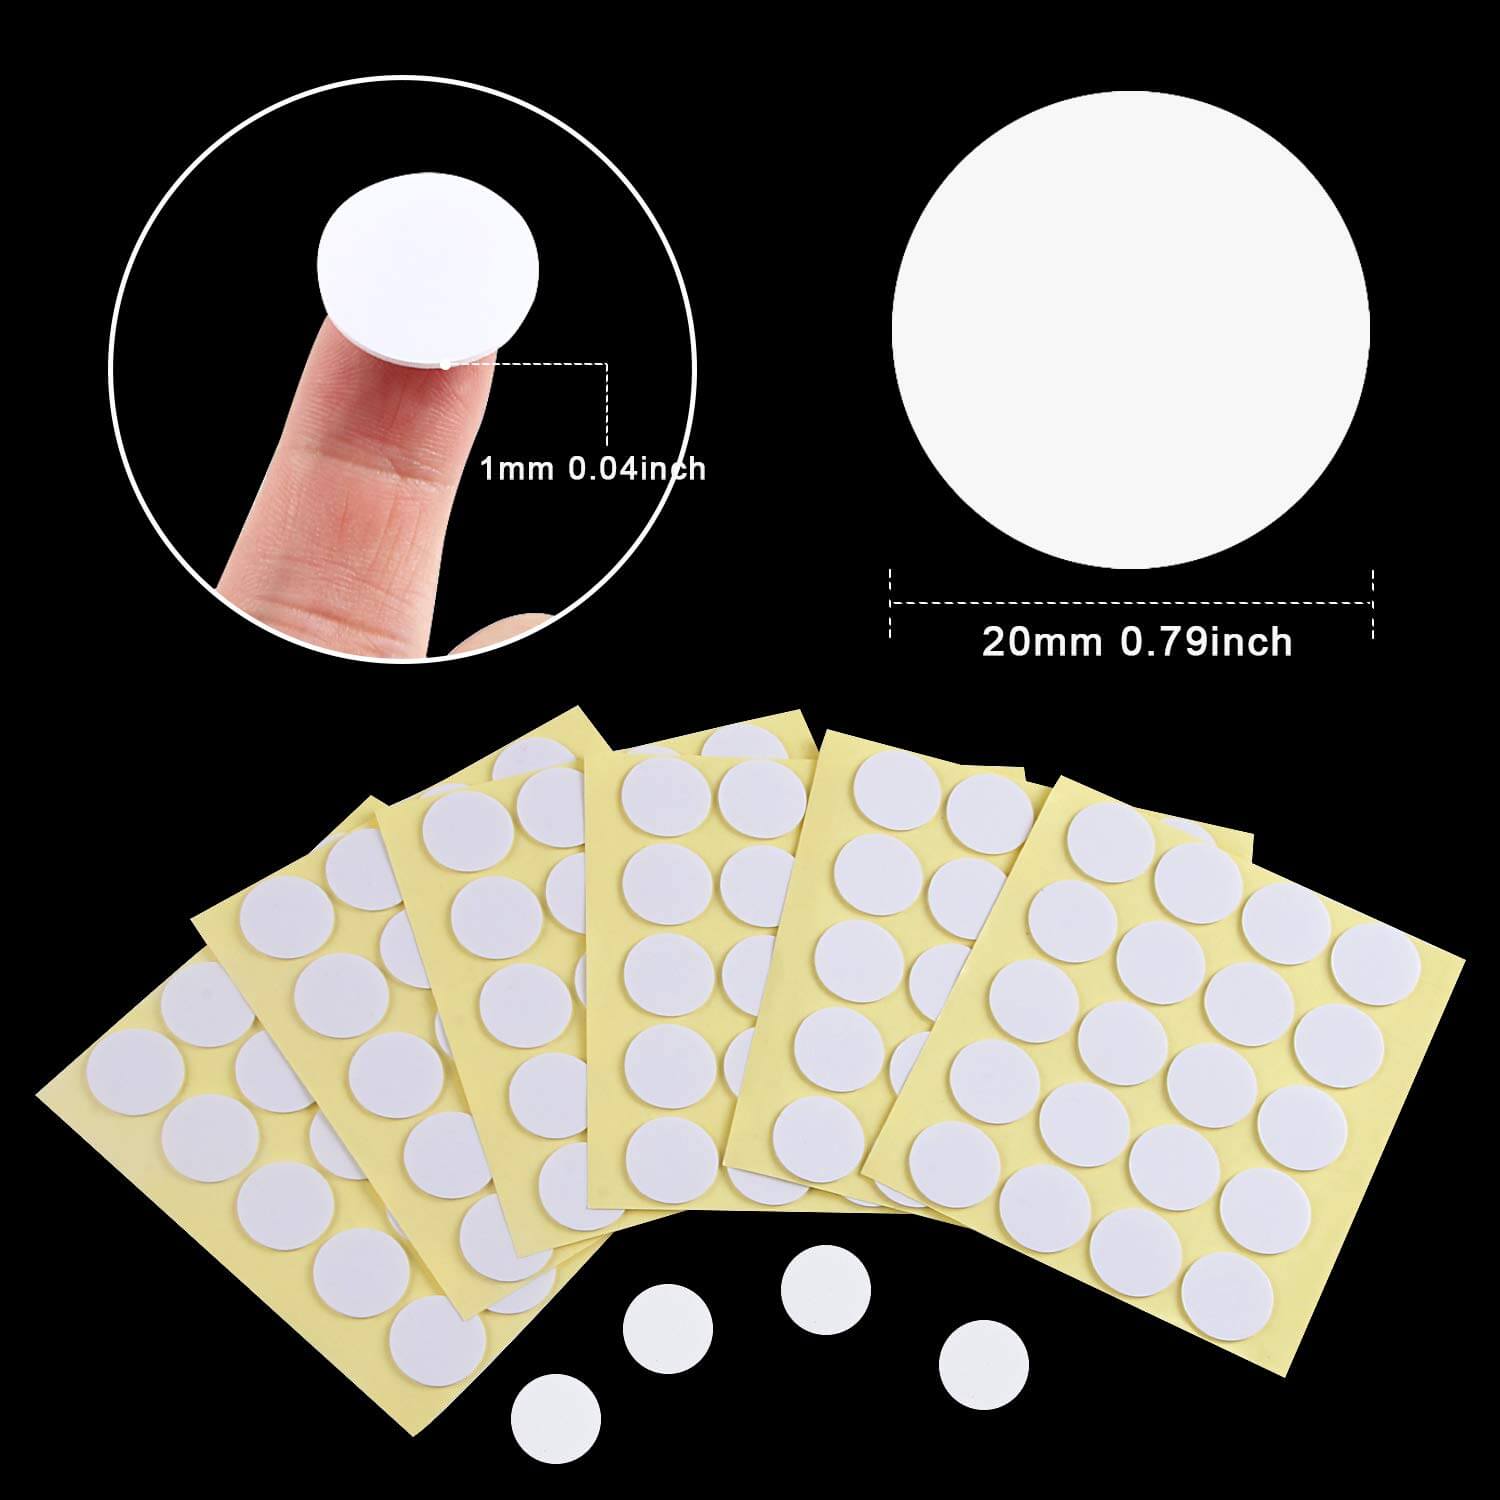 400Pcs Candle Wick Stickers, Adhere Steady in Hot Heatproof Wax Stickers,  Candle Wick Glue for Candle Making and Candle DIY